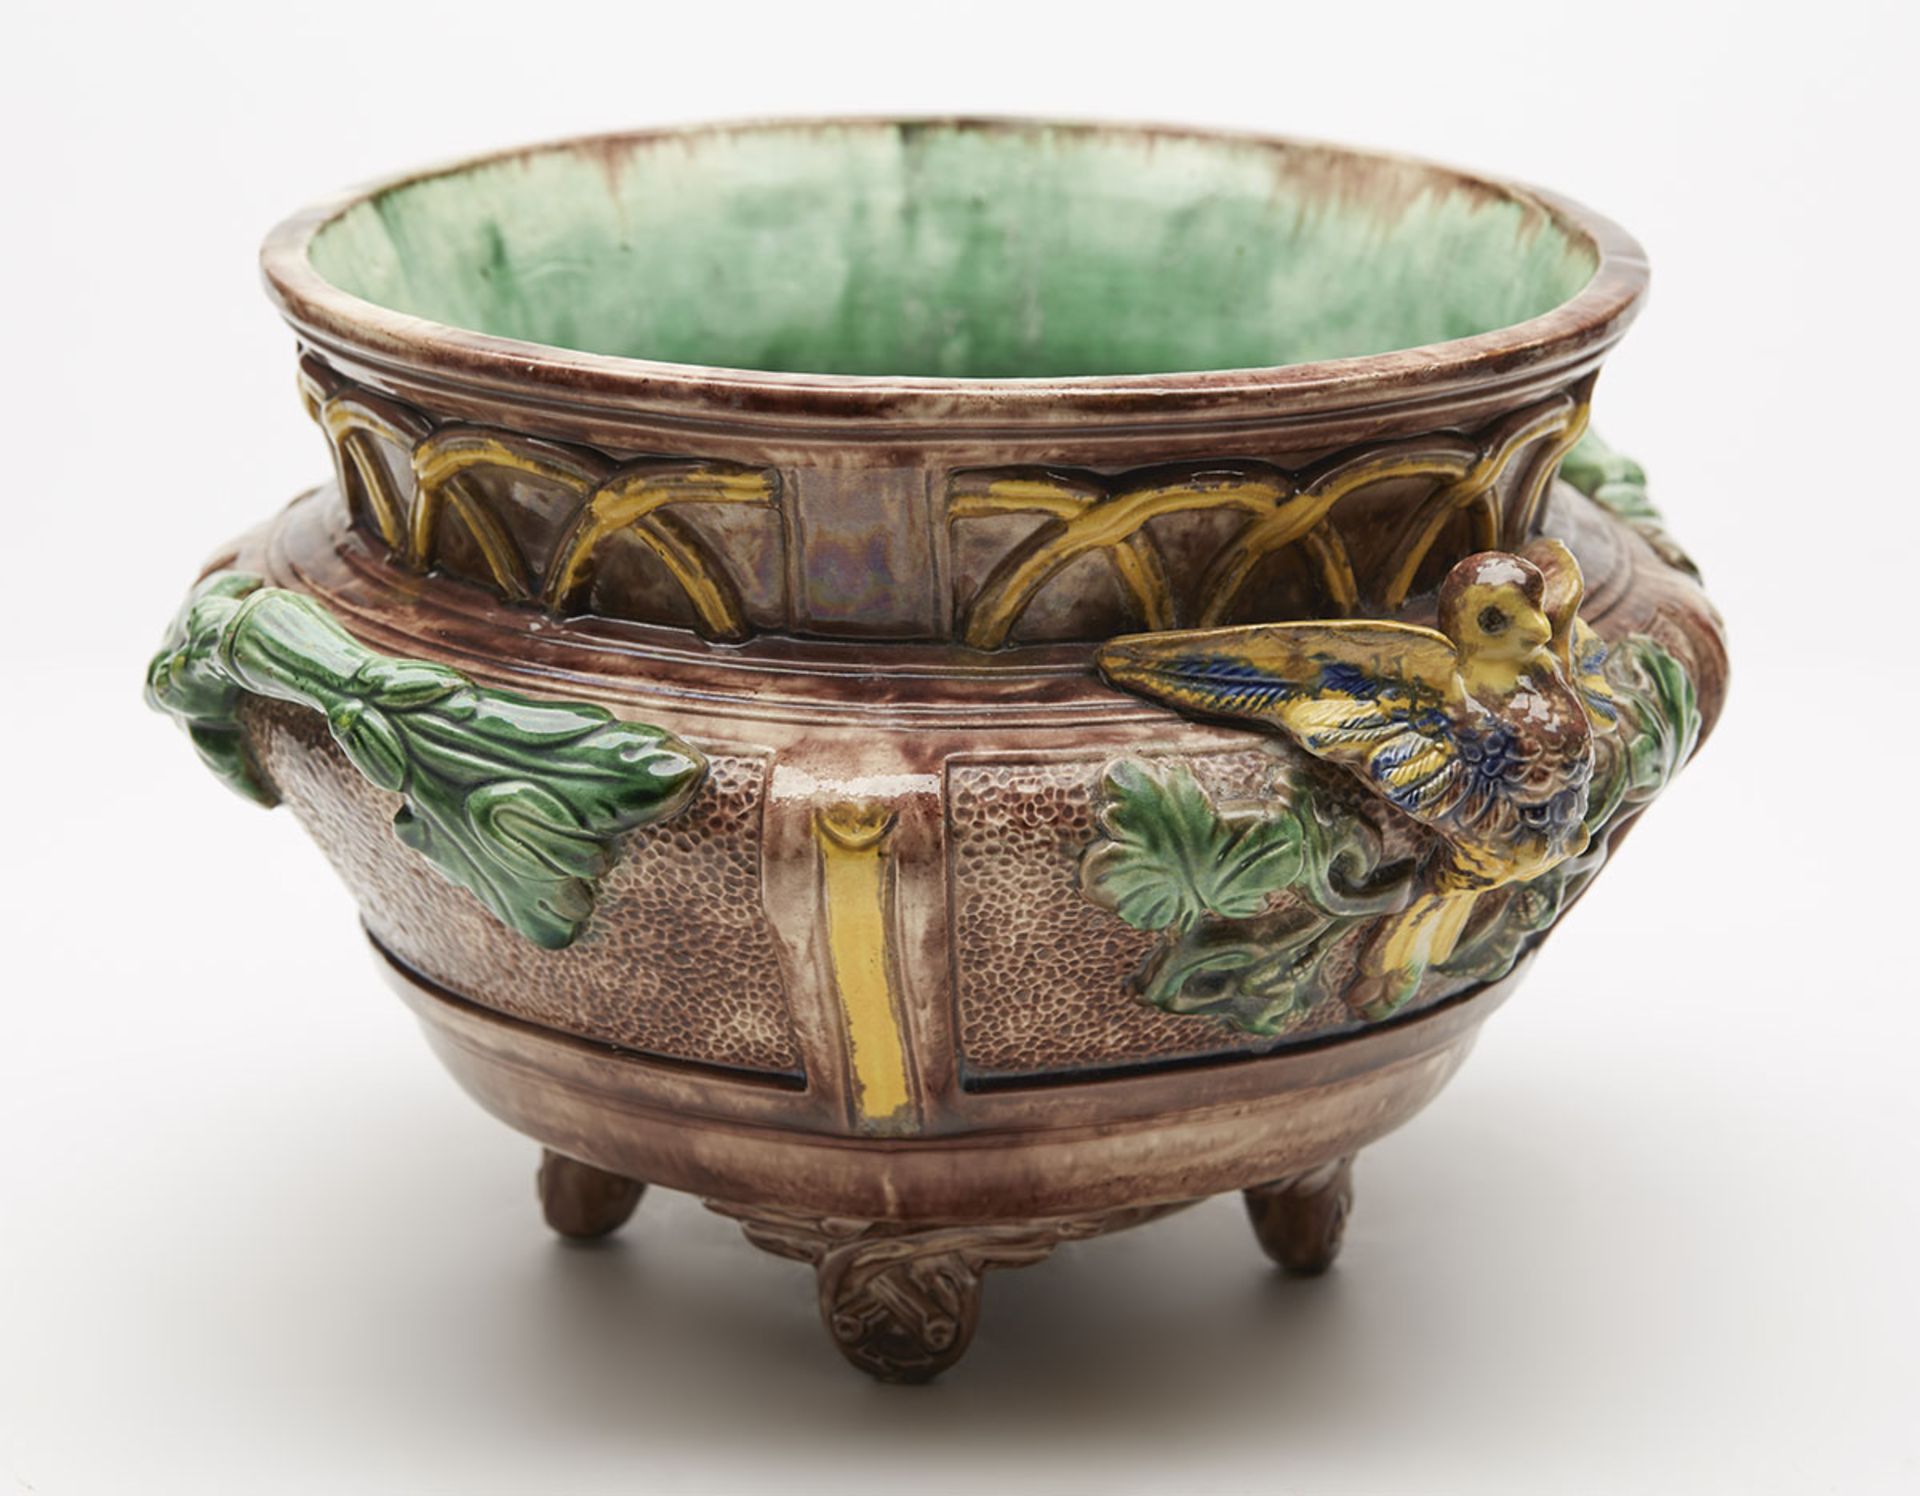 Antique French St Honore Palissy Majolica Planter 19Th C. - Image 3 of 10